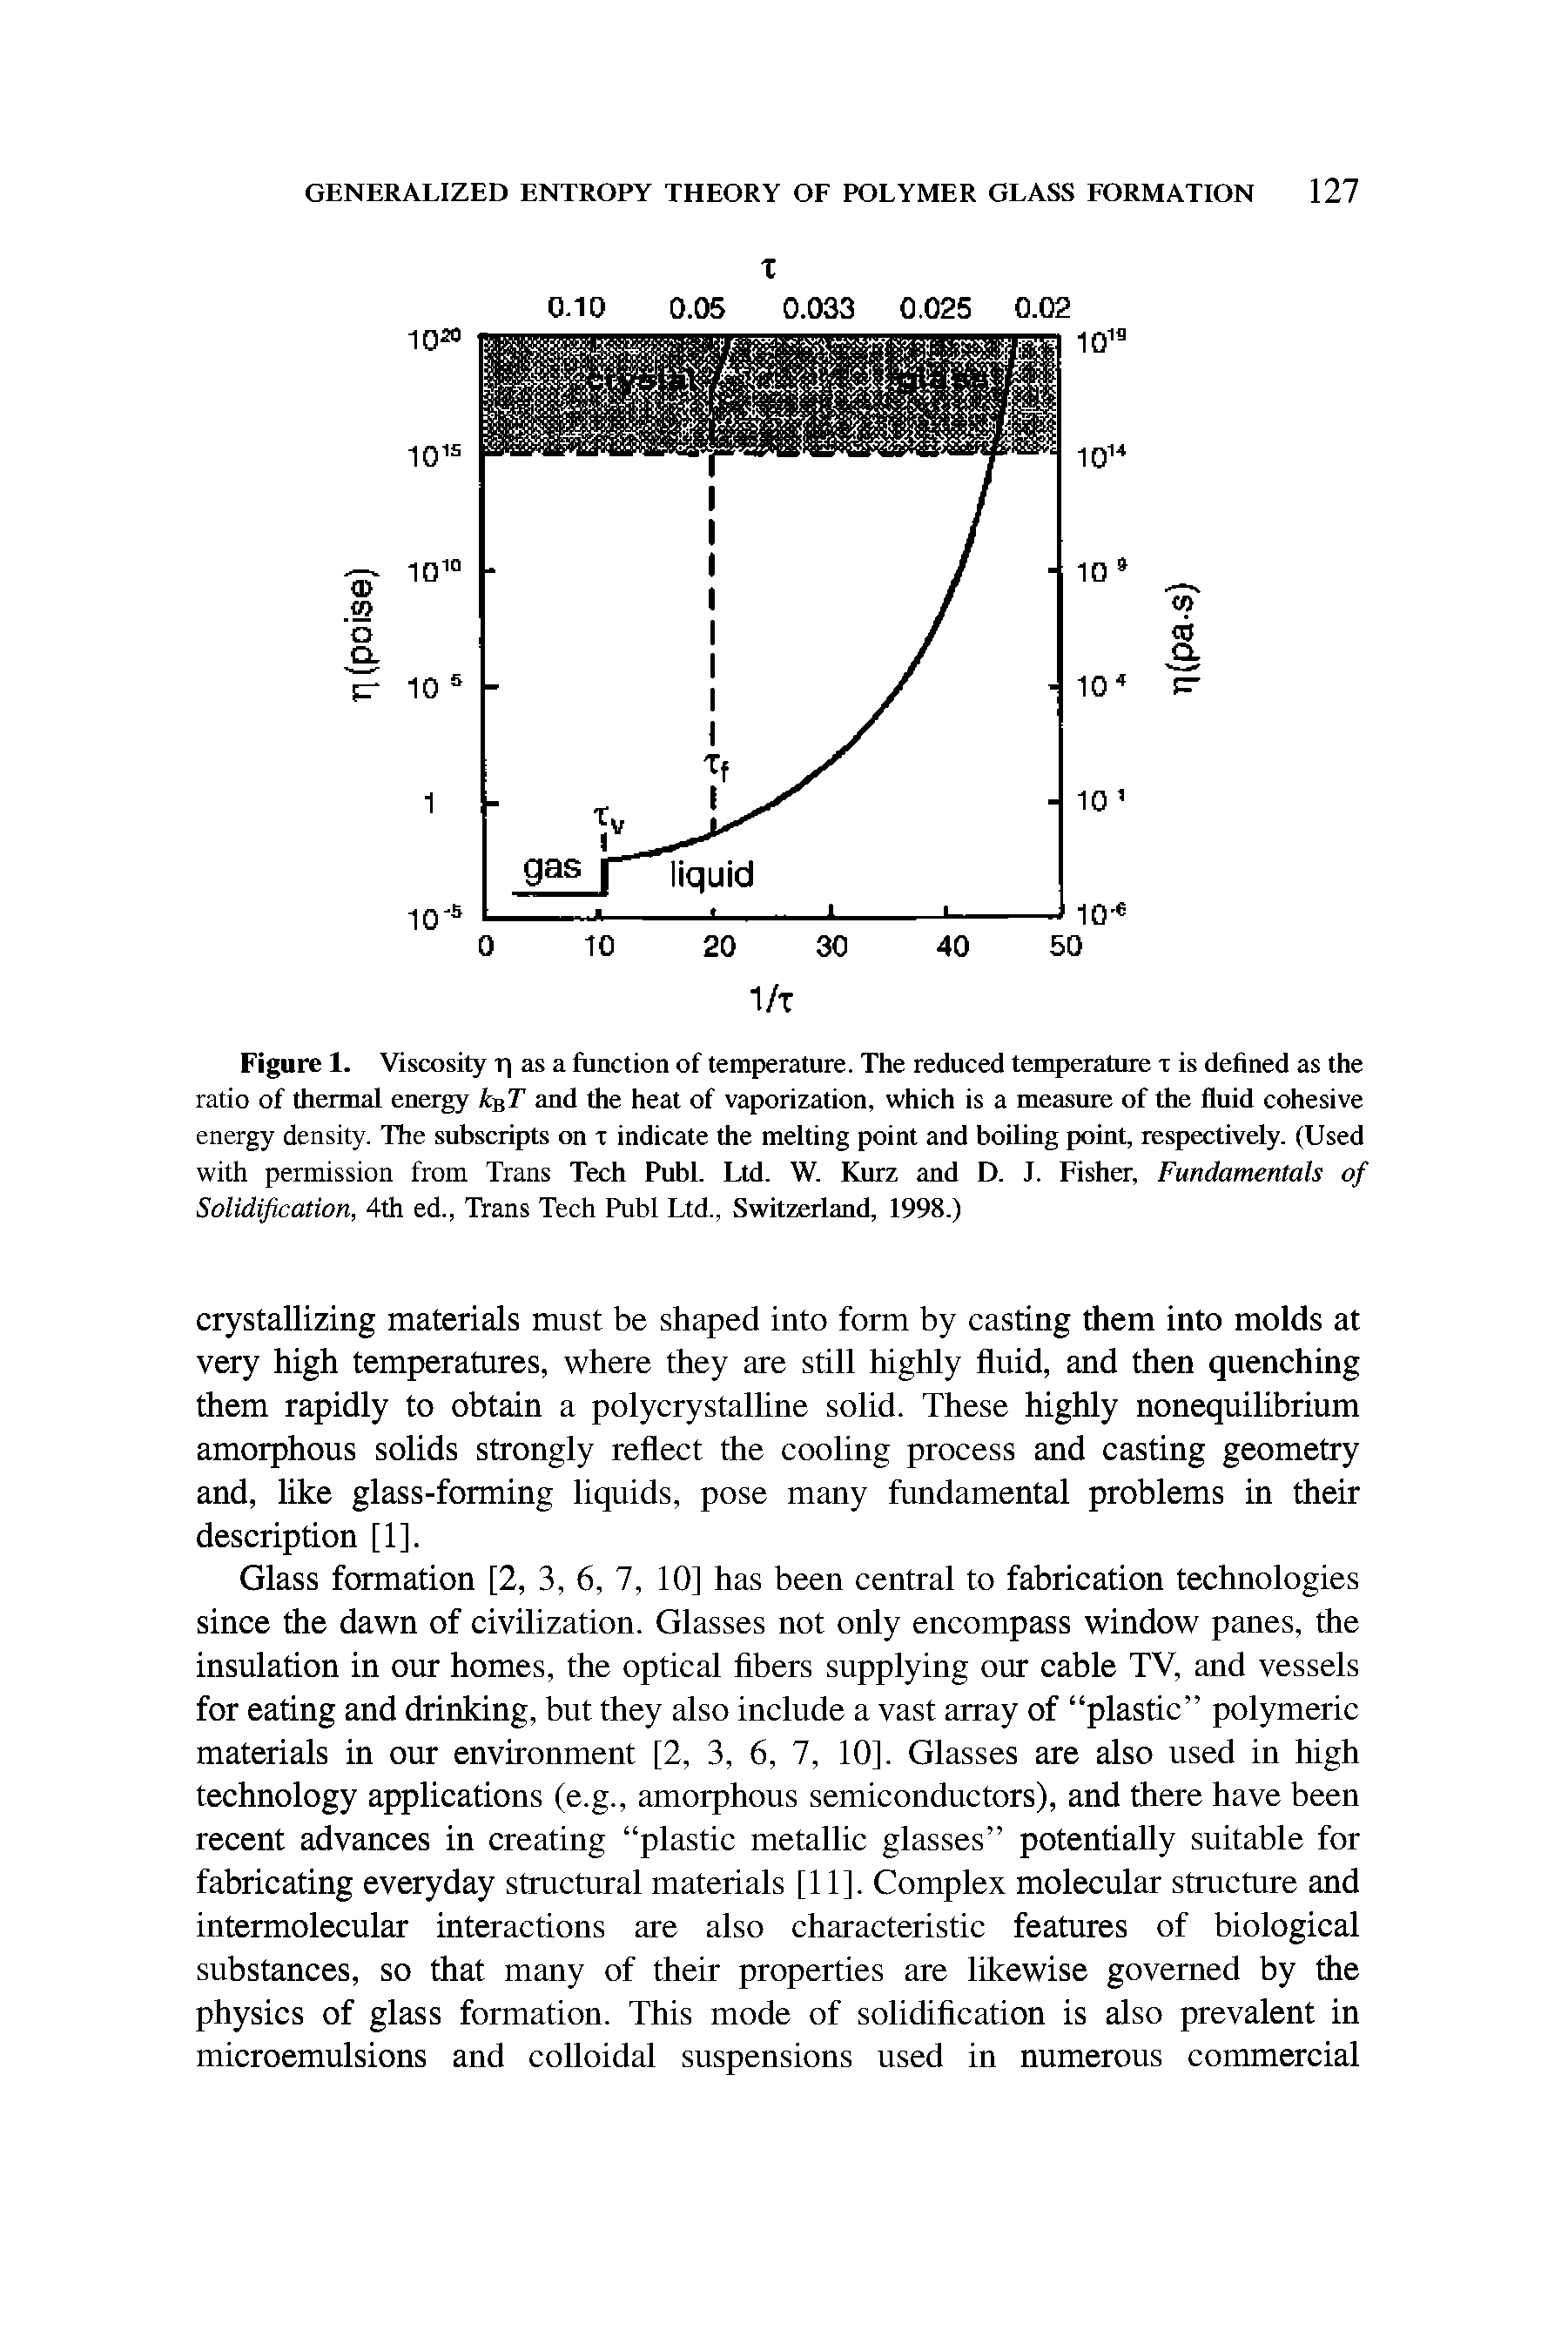 Figure 1. Viscosity T as a function of temperature. The reduced temperature t is defined as the ratio of thermal energy k T and the heat of vaporization, which is a measure of the fluid cohesive energy density. The subscripts on r indicate the melting point and boiling point, respectively. (Used with permission from Trans Tech Publ. Ltd. W. Kurz and D. J. Fisher, Fundamentals of Solidification, 4th ed., Trans Tech Publ Ltd., Switzerland, 1998.)...